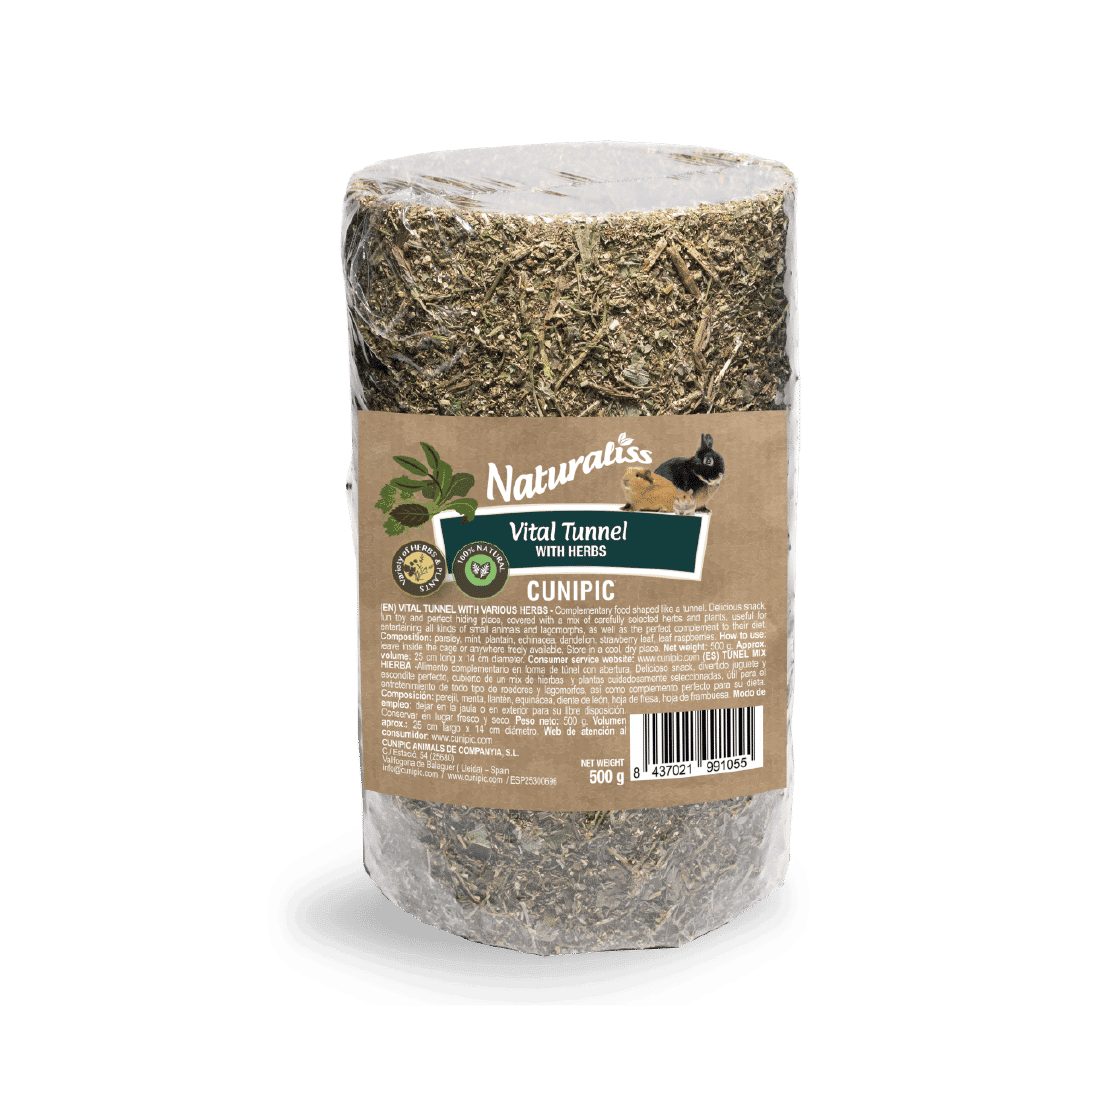 Snack Naturaliss : Tunnel mélange d'herbes